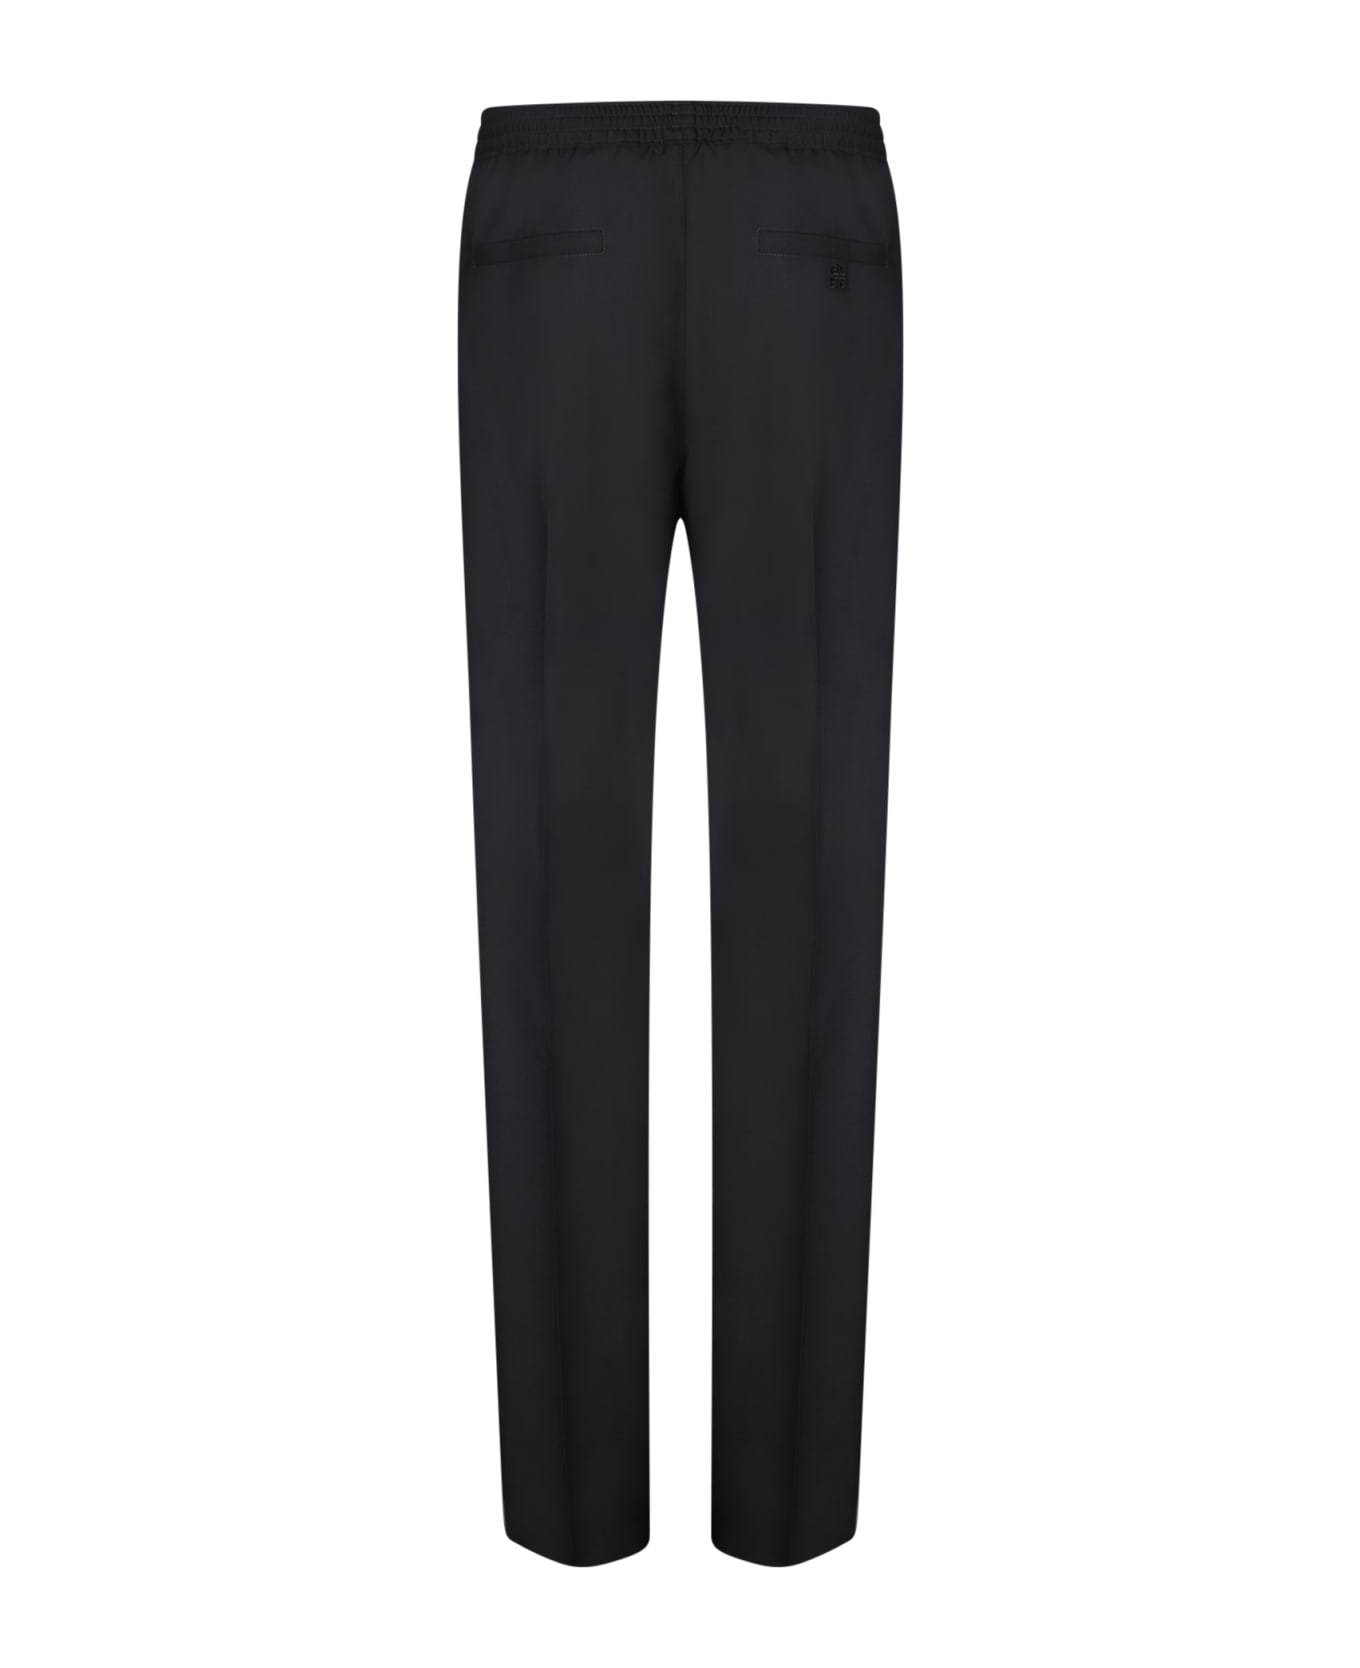 Givenchy Pants In Black Mohair - black